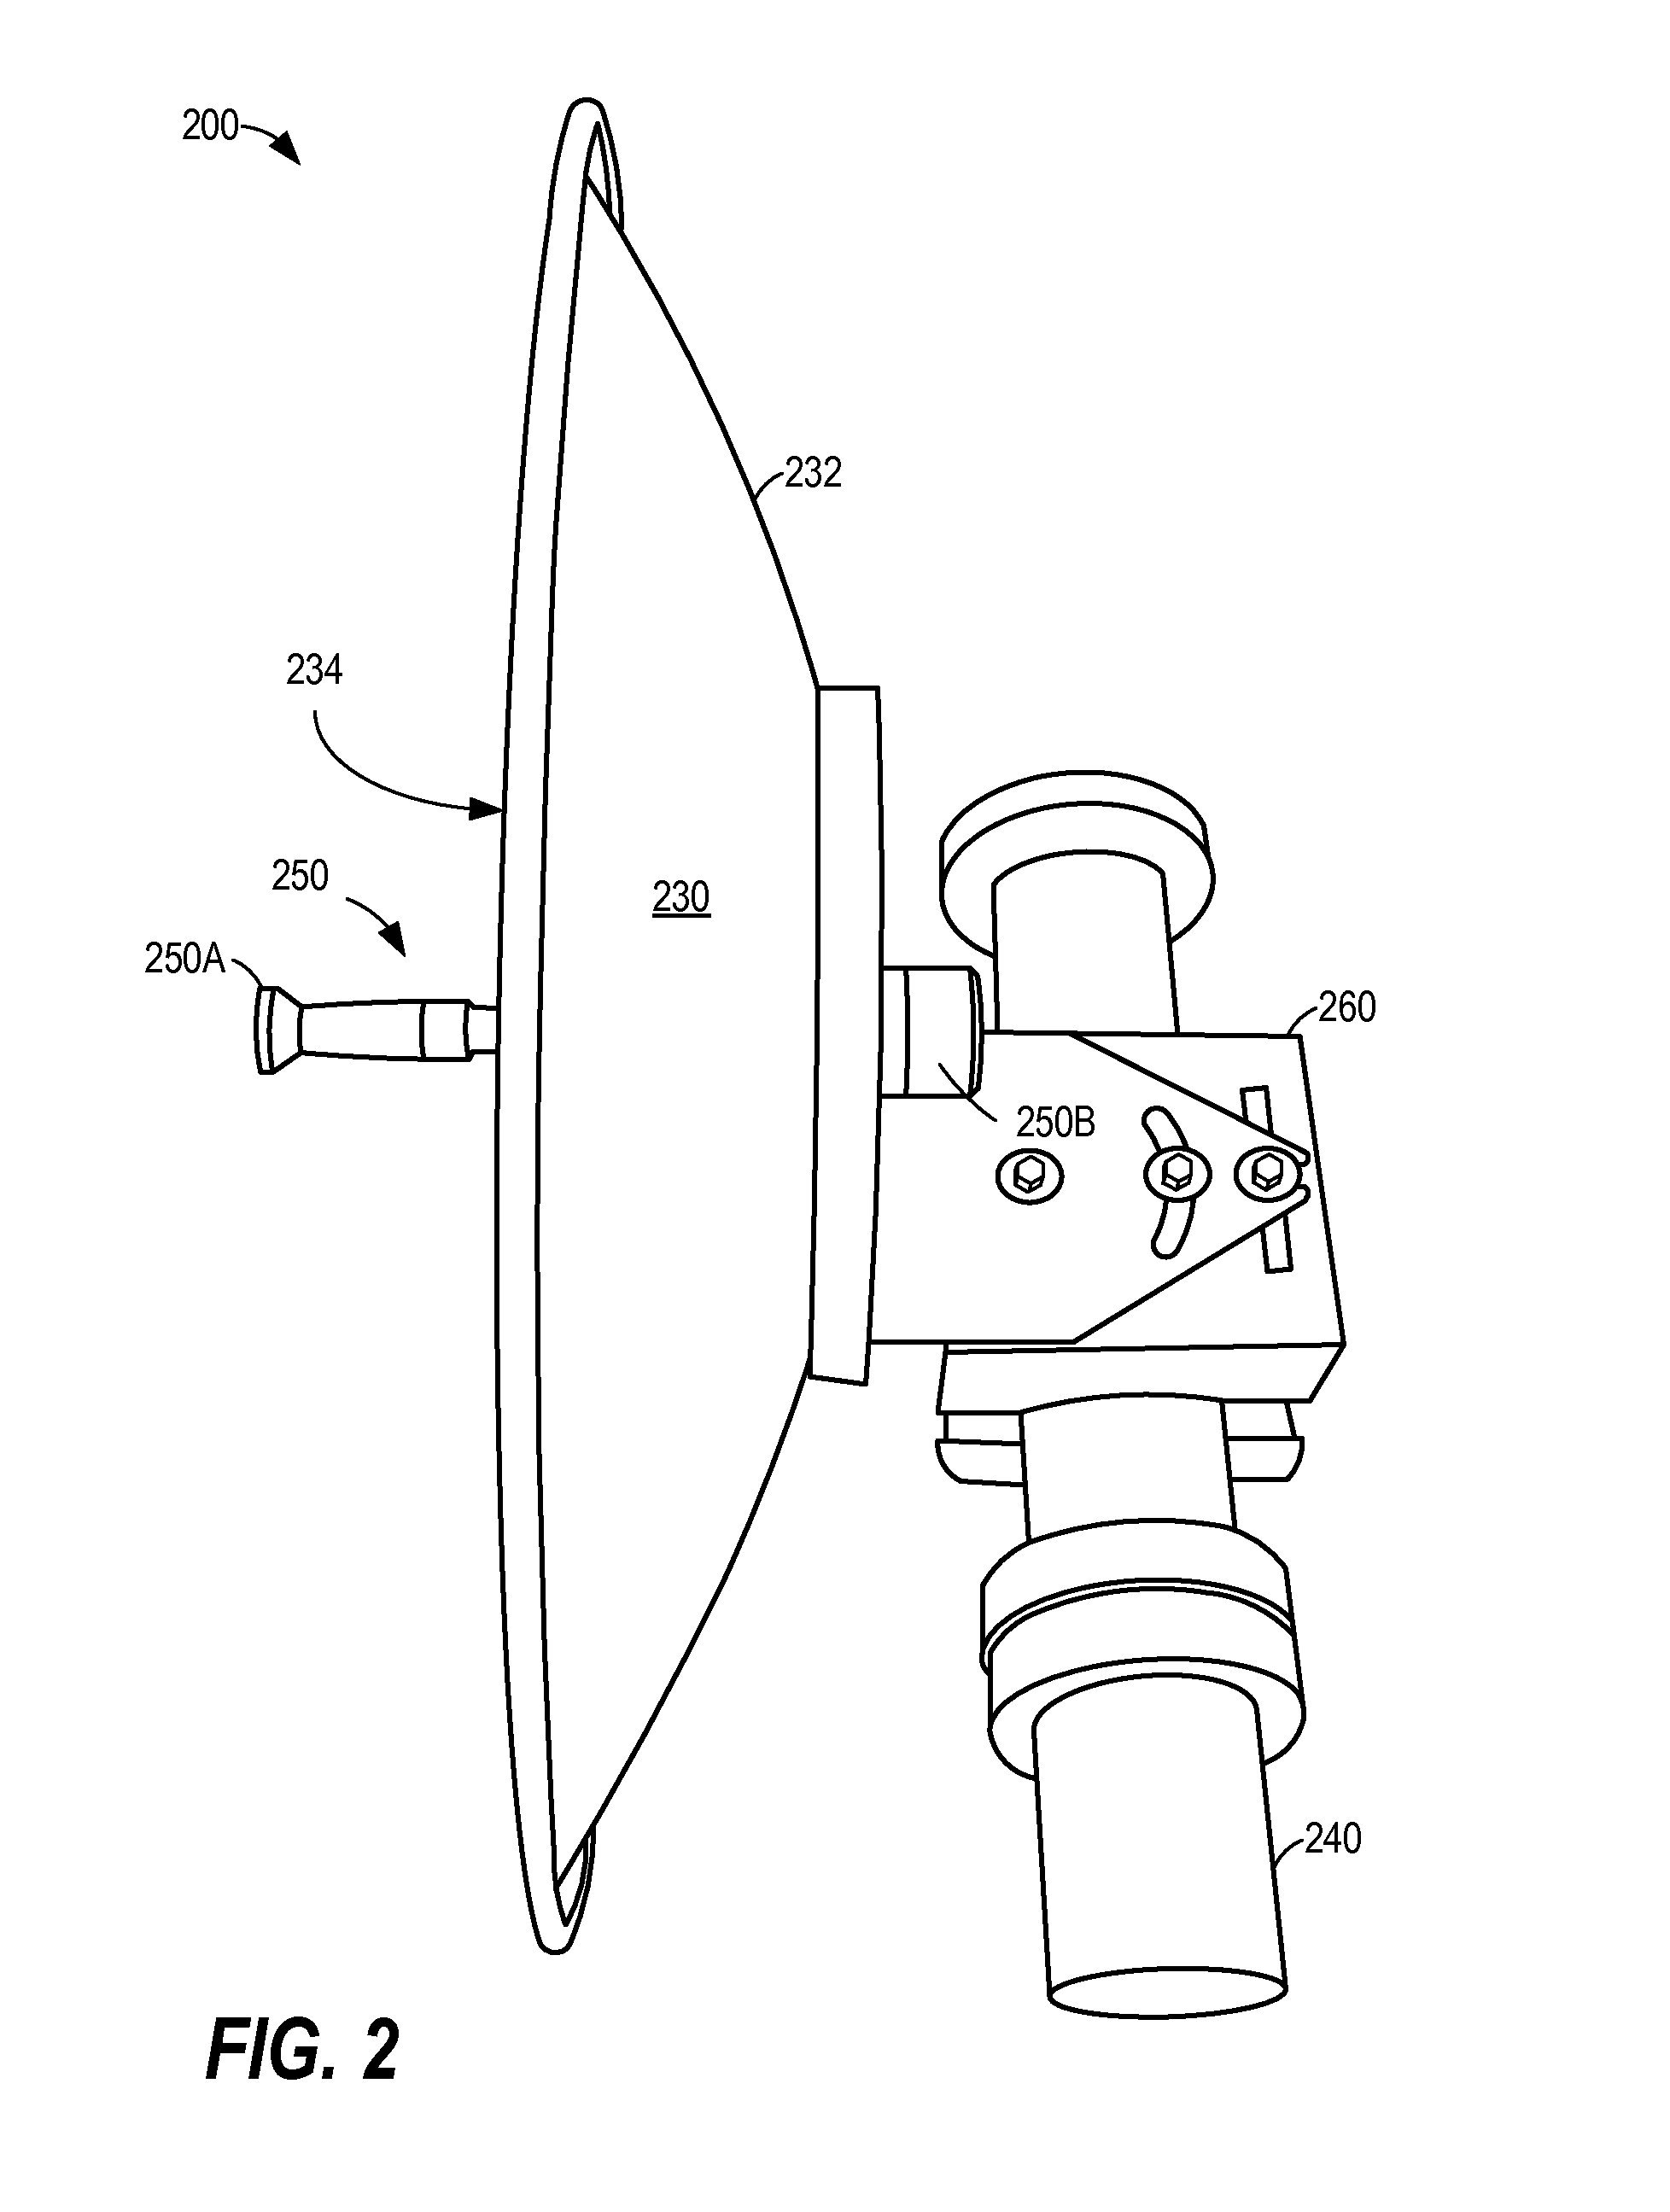 System and method for antenna alignment